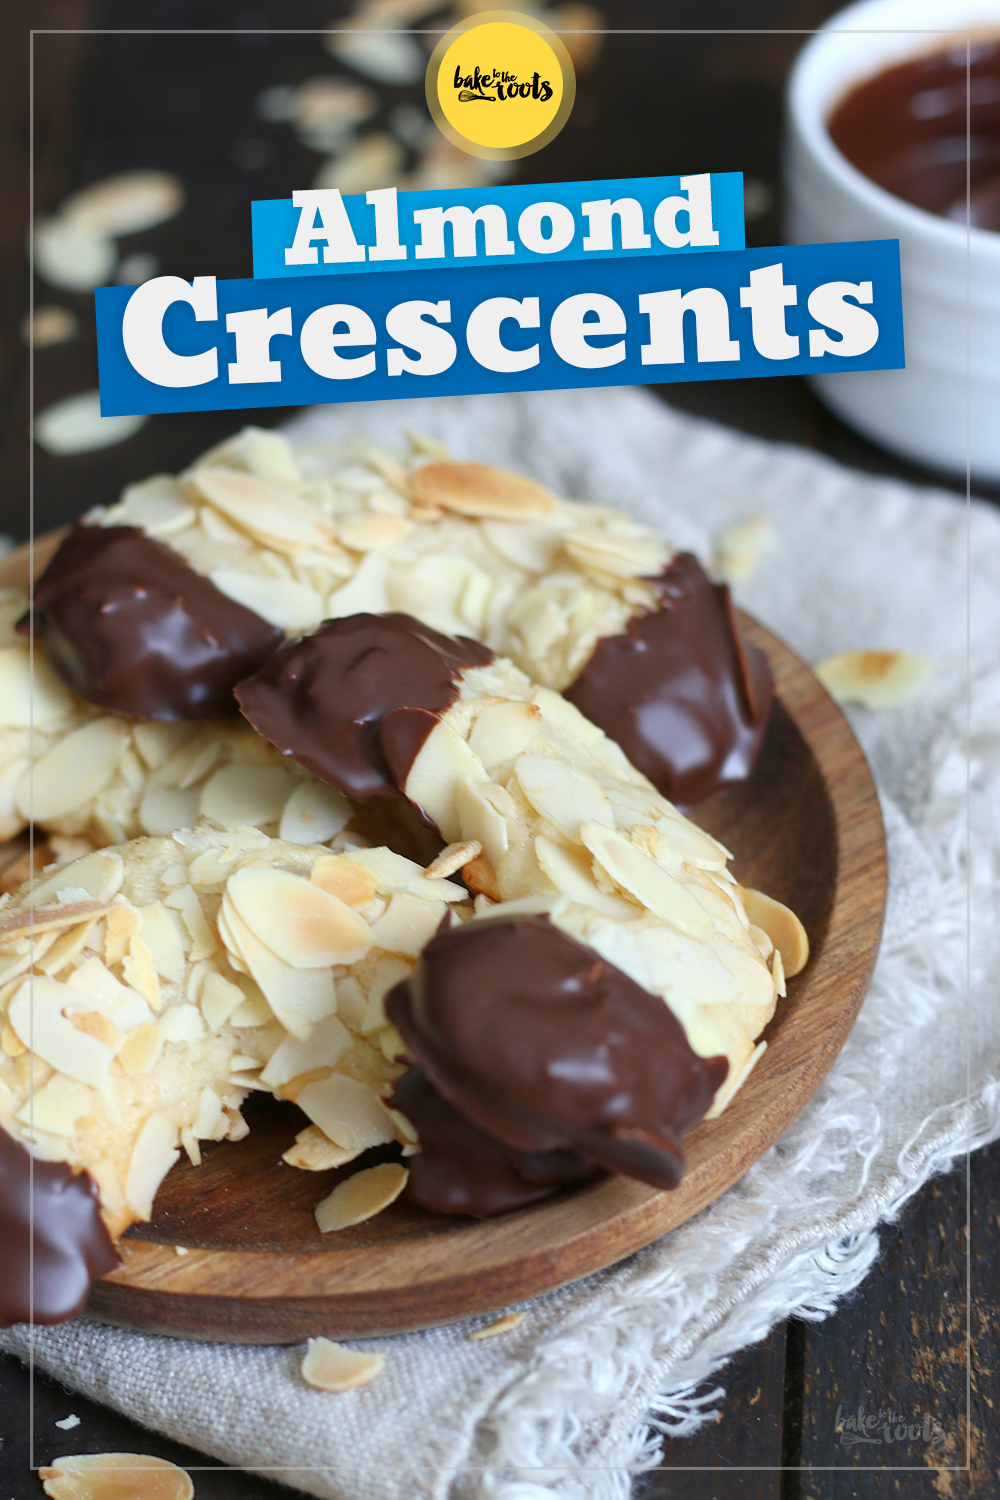 Almond Crescents | Bake to the roots